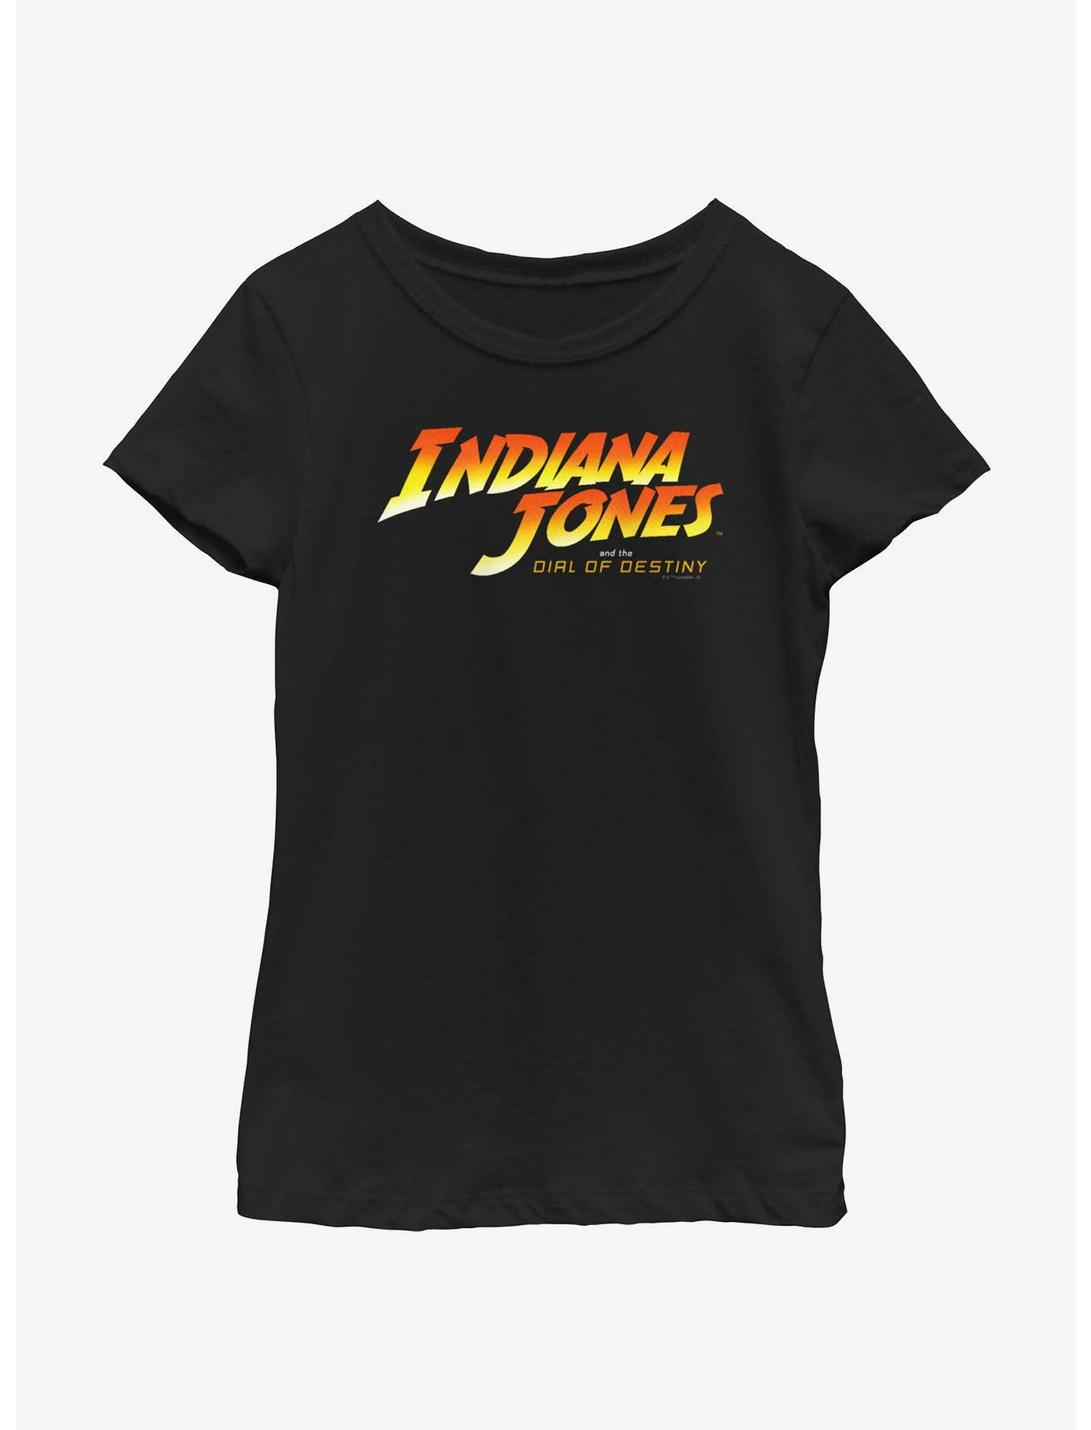 Indiana Jones And The Dial Of Destiny Logo Youth Girls T-Shirt, BLACK, hi-res